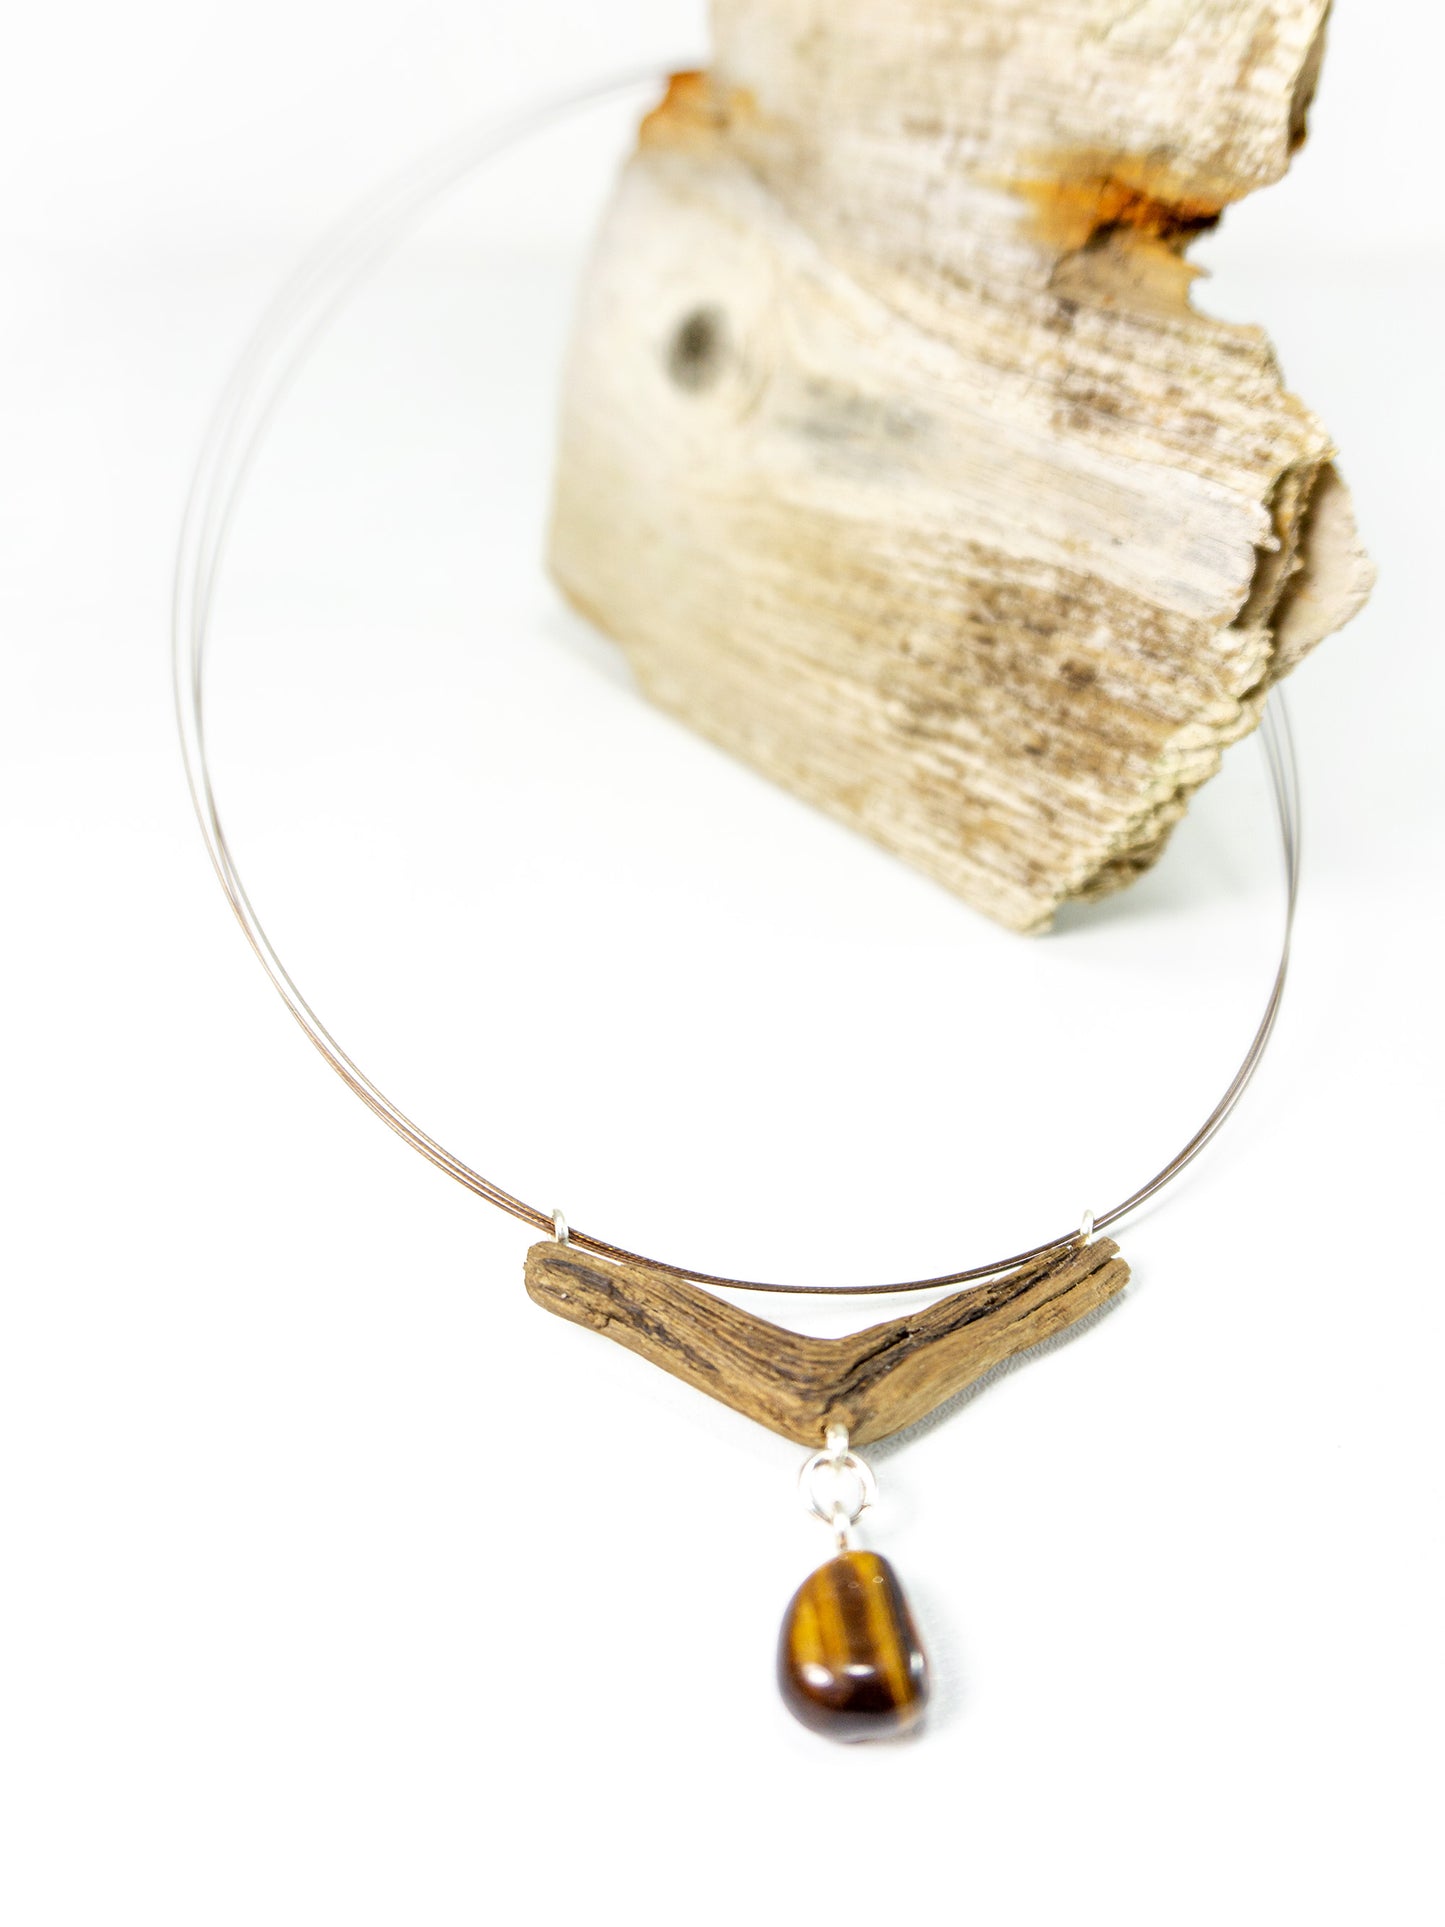 One-of-a-kind DRIFTWOOD NECKLACE 'Fünen' with tiger eye, 925 silver